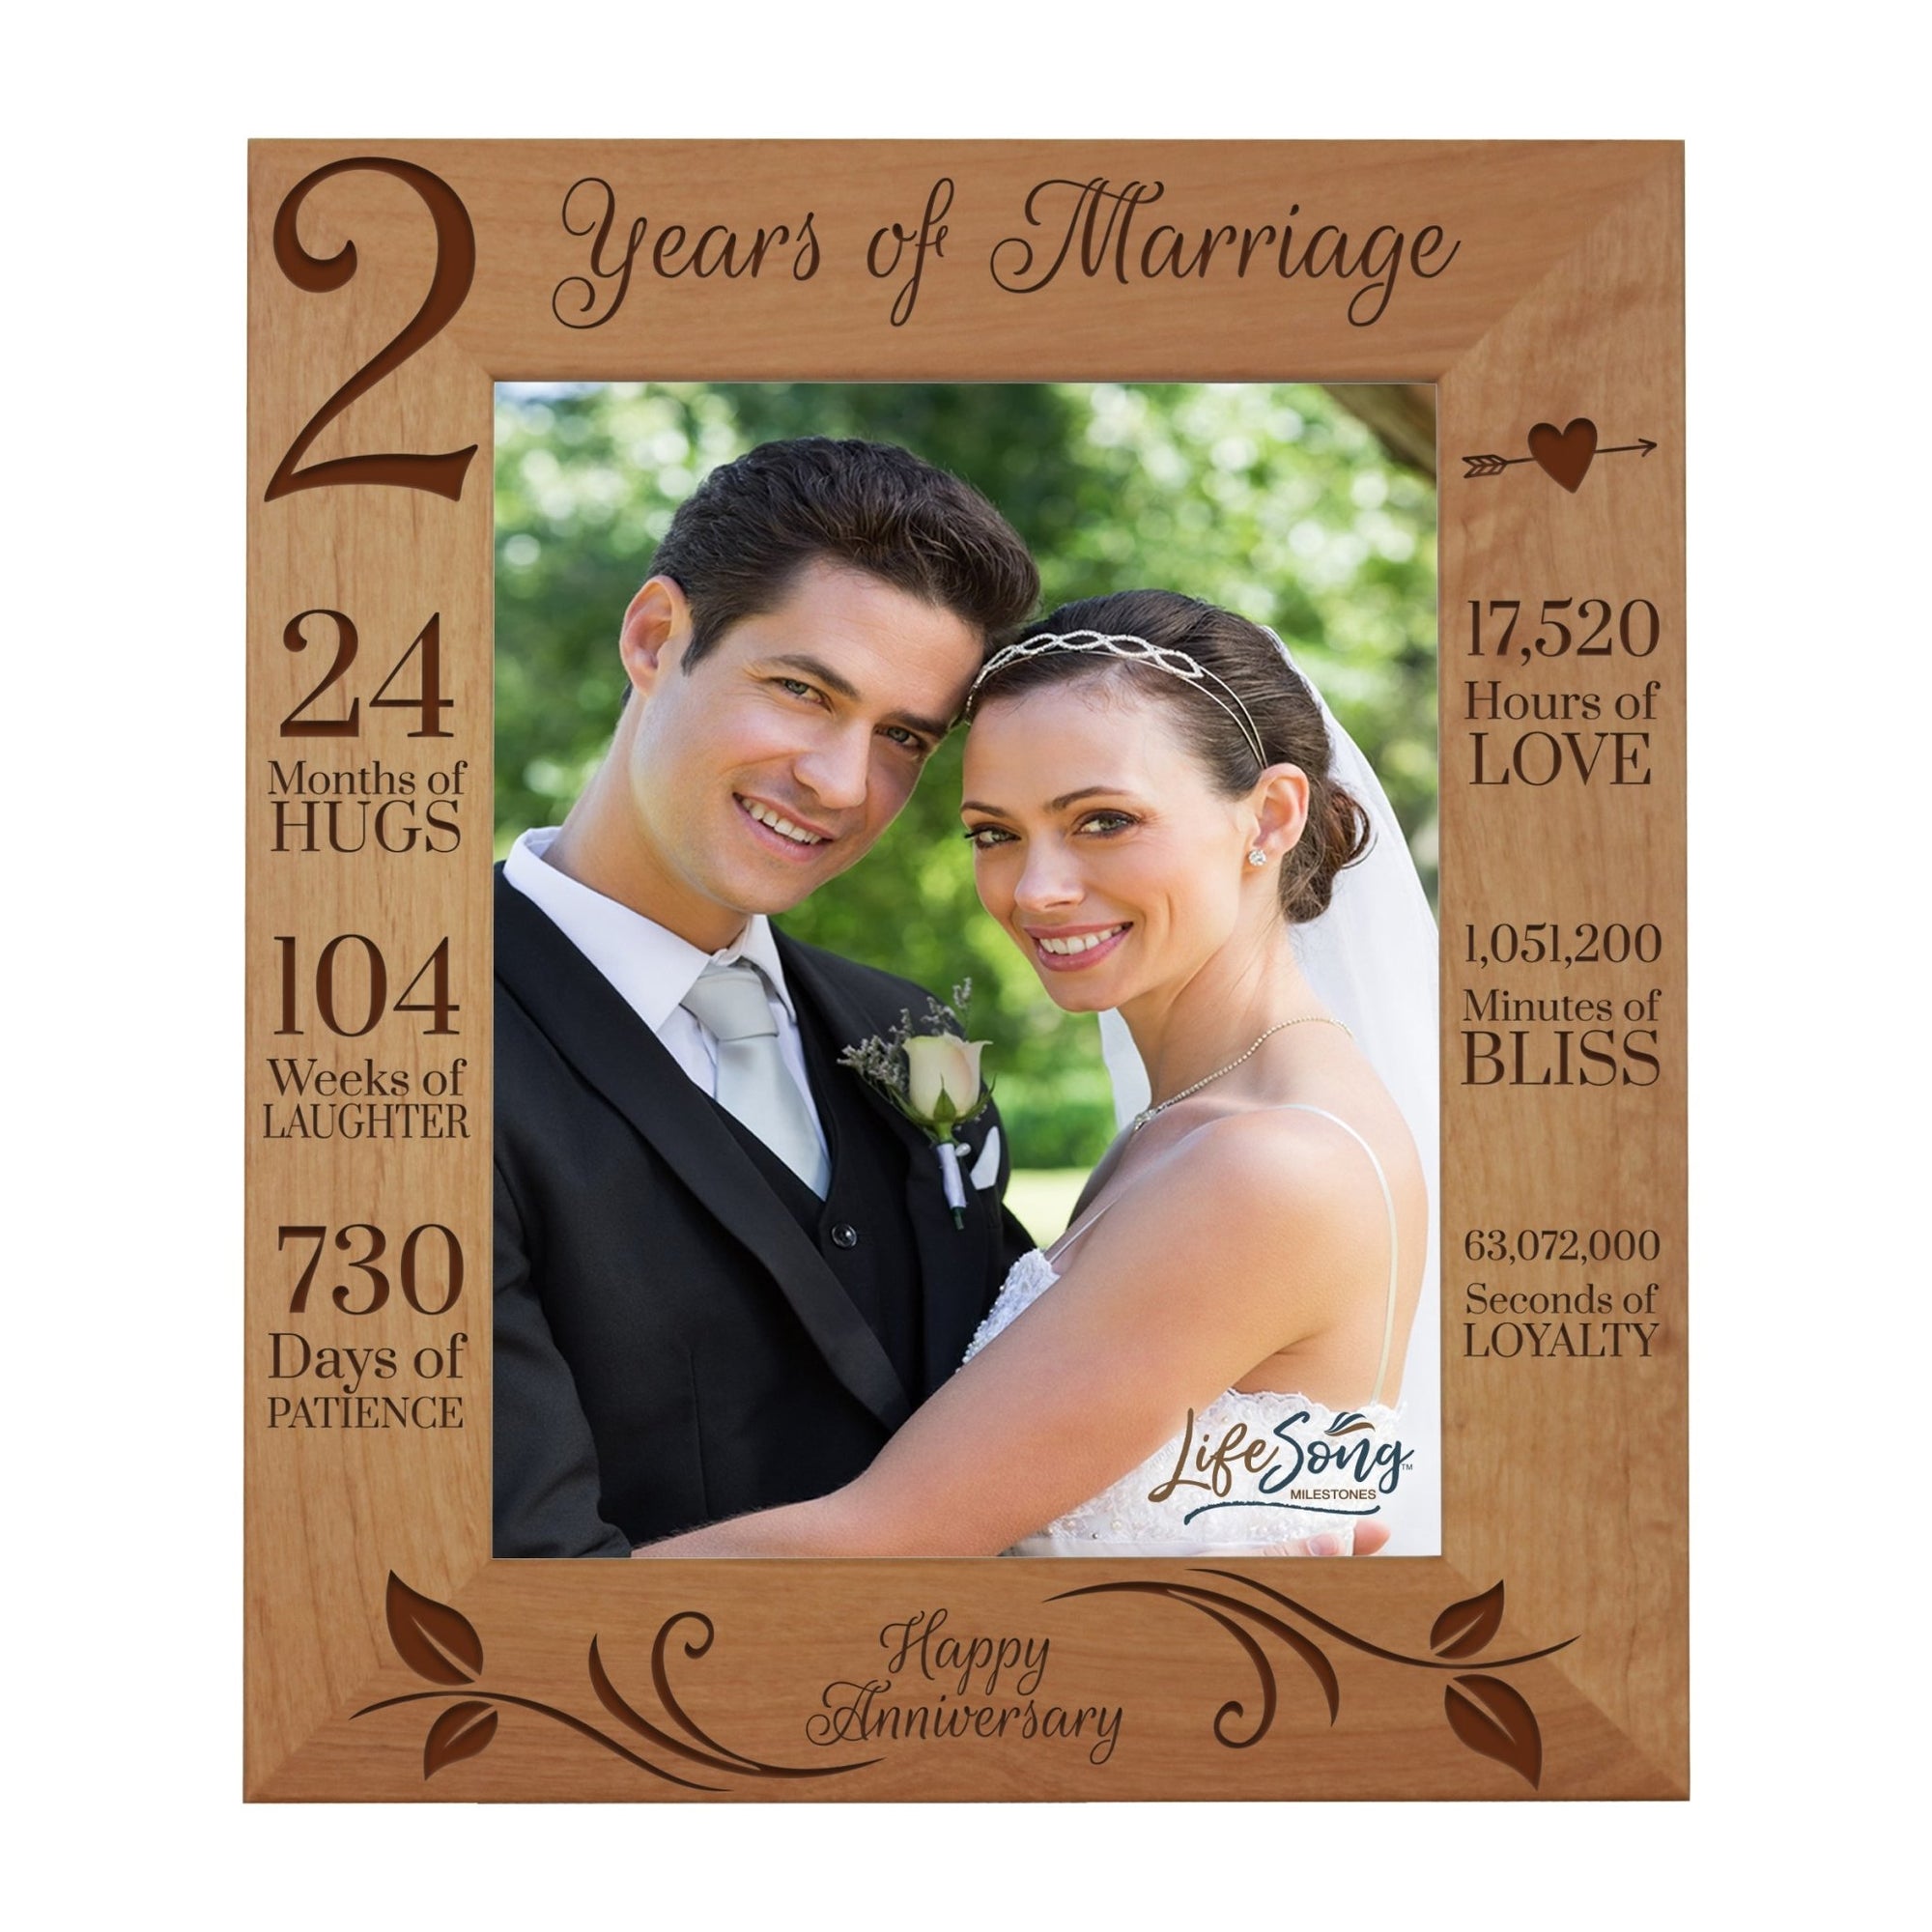 Engraved 2nd Anniversary Photo Frame - 11.5 x 13.5 - LifeSong Milestones